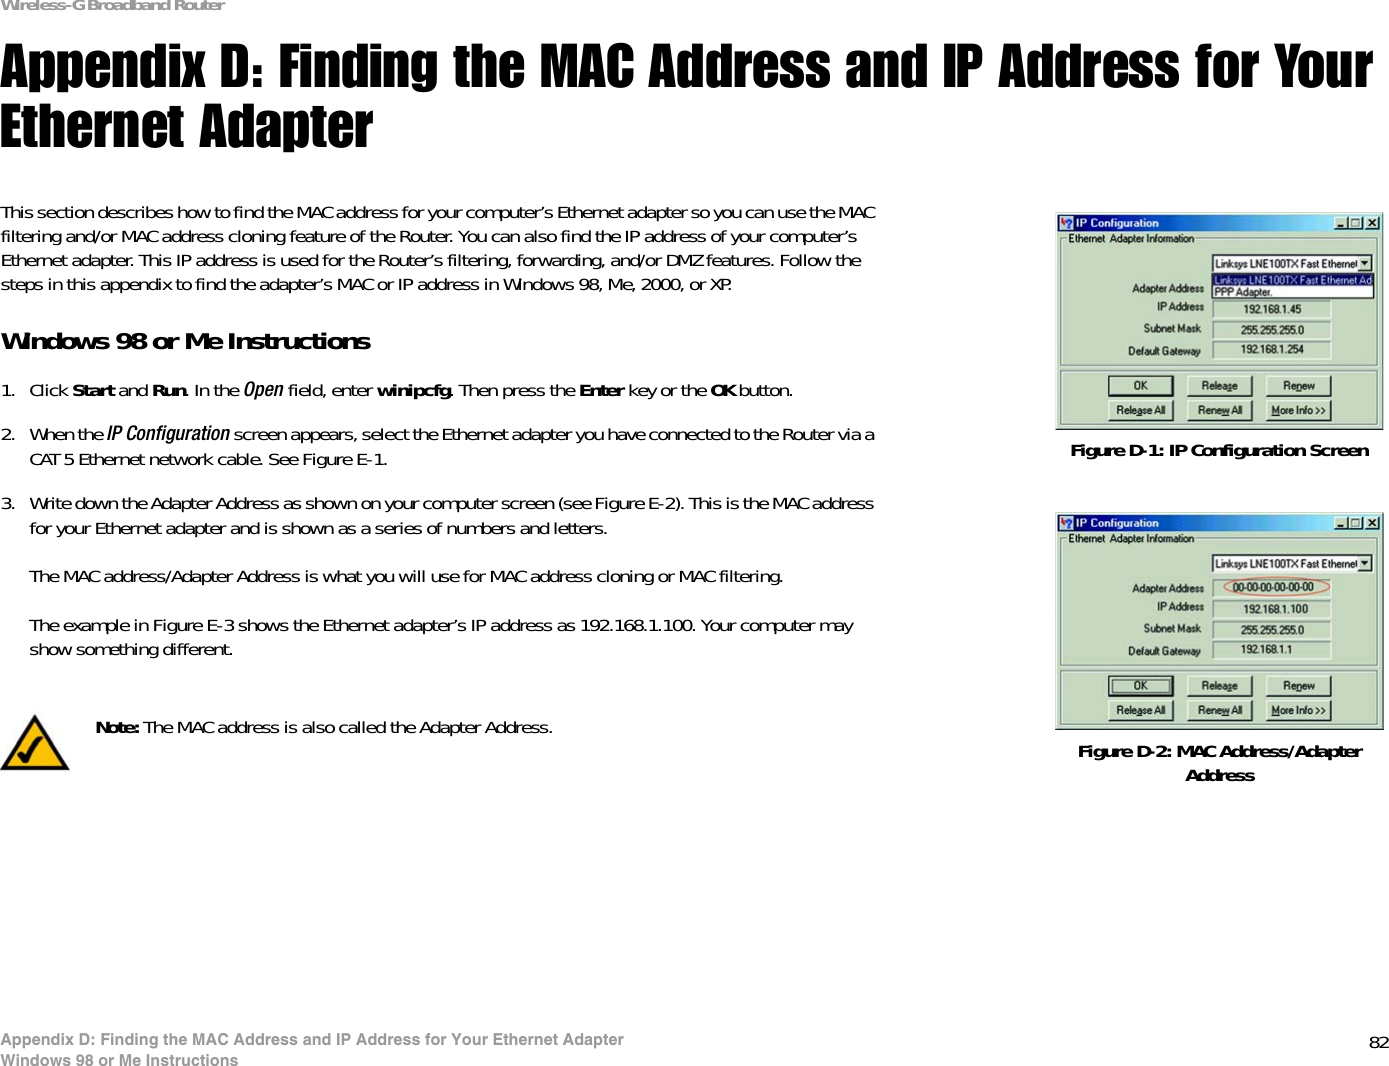 82Appendix D: Finding the MAC Address and IP Address for Your Ethernet AdapterWindows 98 or Me InstructionsWireless-G Broadband RouterAppendix D: Finding the MAC Address and IP Address for Your Ethernet AdapterThis section describes how to find the MAC address for your computer’s Ethernet adapter so you can use the MAC filtering and/or MAC address cloning feature of the Router. You can also find the IP address of your computer’s Ethernet adapter. This IP address is used for the Router’s filtering, forwarding, and/or DMZ features. Follow the steps in this appendix to find the adapter’s MAC or IP address in Windows 98, Me, 2000, or XP.Windows 98 or Me Instructions1. Click Start and Run. In the Open field, enter winipcfg. Then press the Enter key or the OK button. 2. When the IP Configuration screen appears, select the Ethernet adapter you have connected to the Router via a CAT 5 Ethernet network cable. See Figure E-1.3. Write down the Adapter Address as shown on your computer screen (see Figure E-2). This is the MAC address for your Ethernet adapter and is shown as a series of numbers and letters.The MAC address/Adapter Address is what you will use for MAC address cloning or MAC filtering.The example in Figure E-3 shows the Ethernet adapter’s IP address as 192.168.1.100. Your computer may show something different.Figure D-2: MAC Address/Adapter AddressFigure D-1: IP Configuration ScreenNote: The MAC address is also called the Adapter Address.